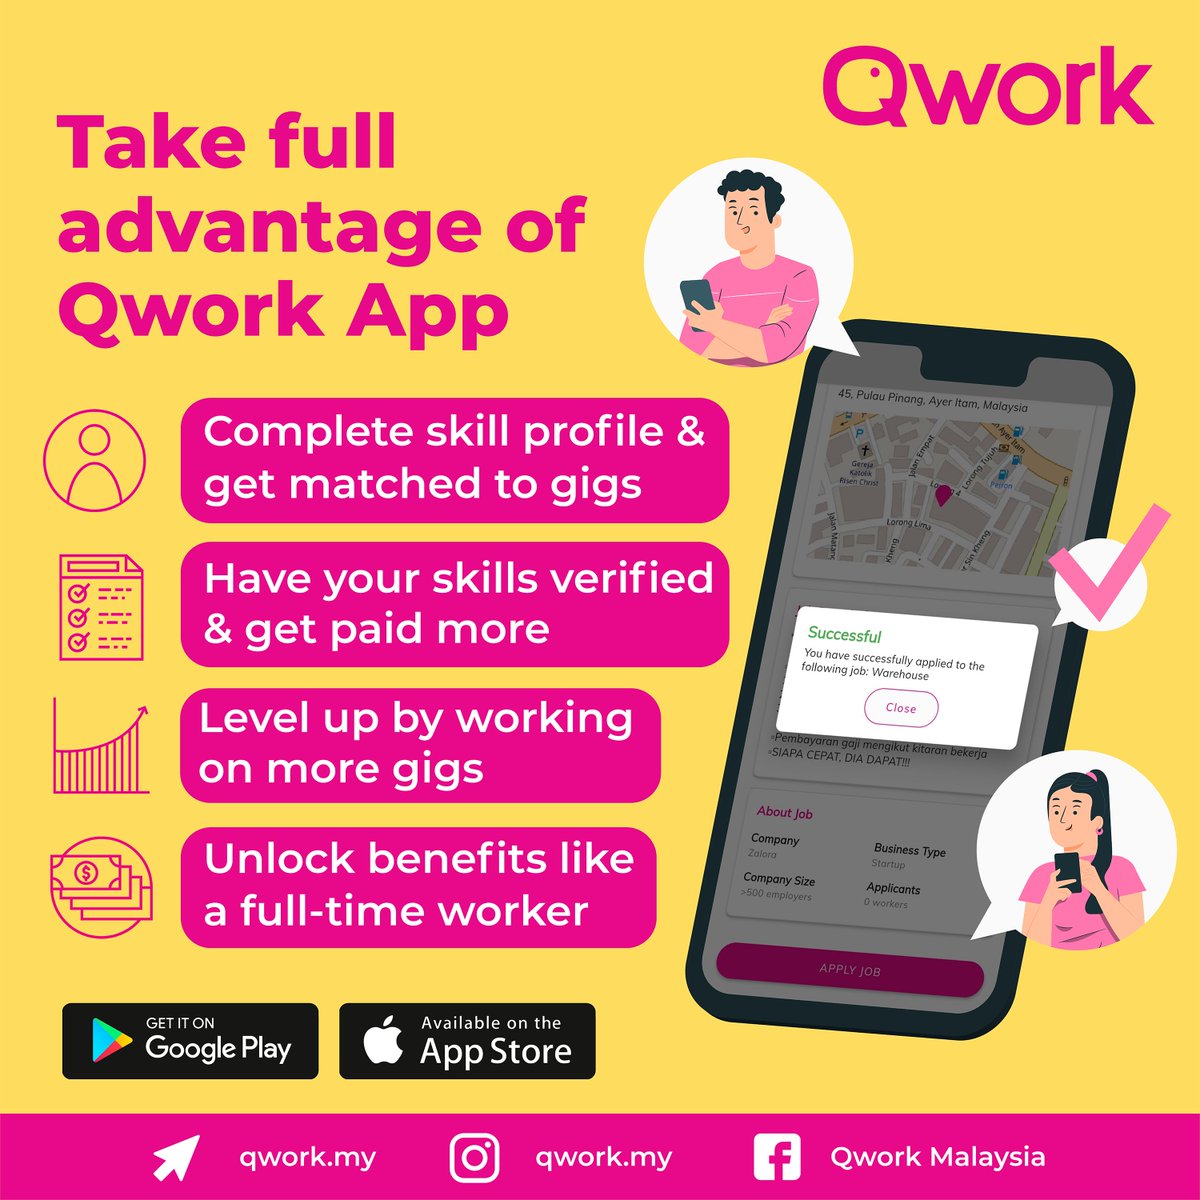 With Qwork App, you can reap all the benefits like a full-time worker: insurance, banking, training opportunities and many more! 😉✨ 

📲✅ Download the app & find gigs today: bit.ly/QworkApp

#NavigatingTheGigEconomy #freelancework #freelancemalaysia #jobmalaysia